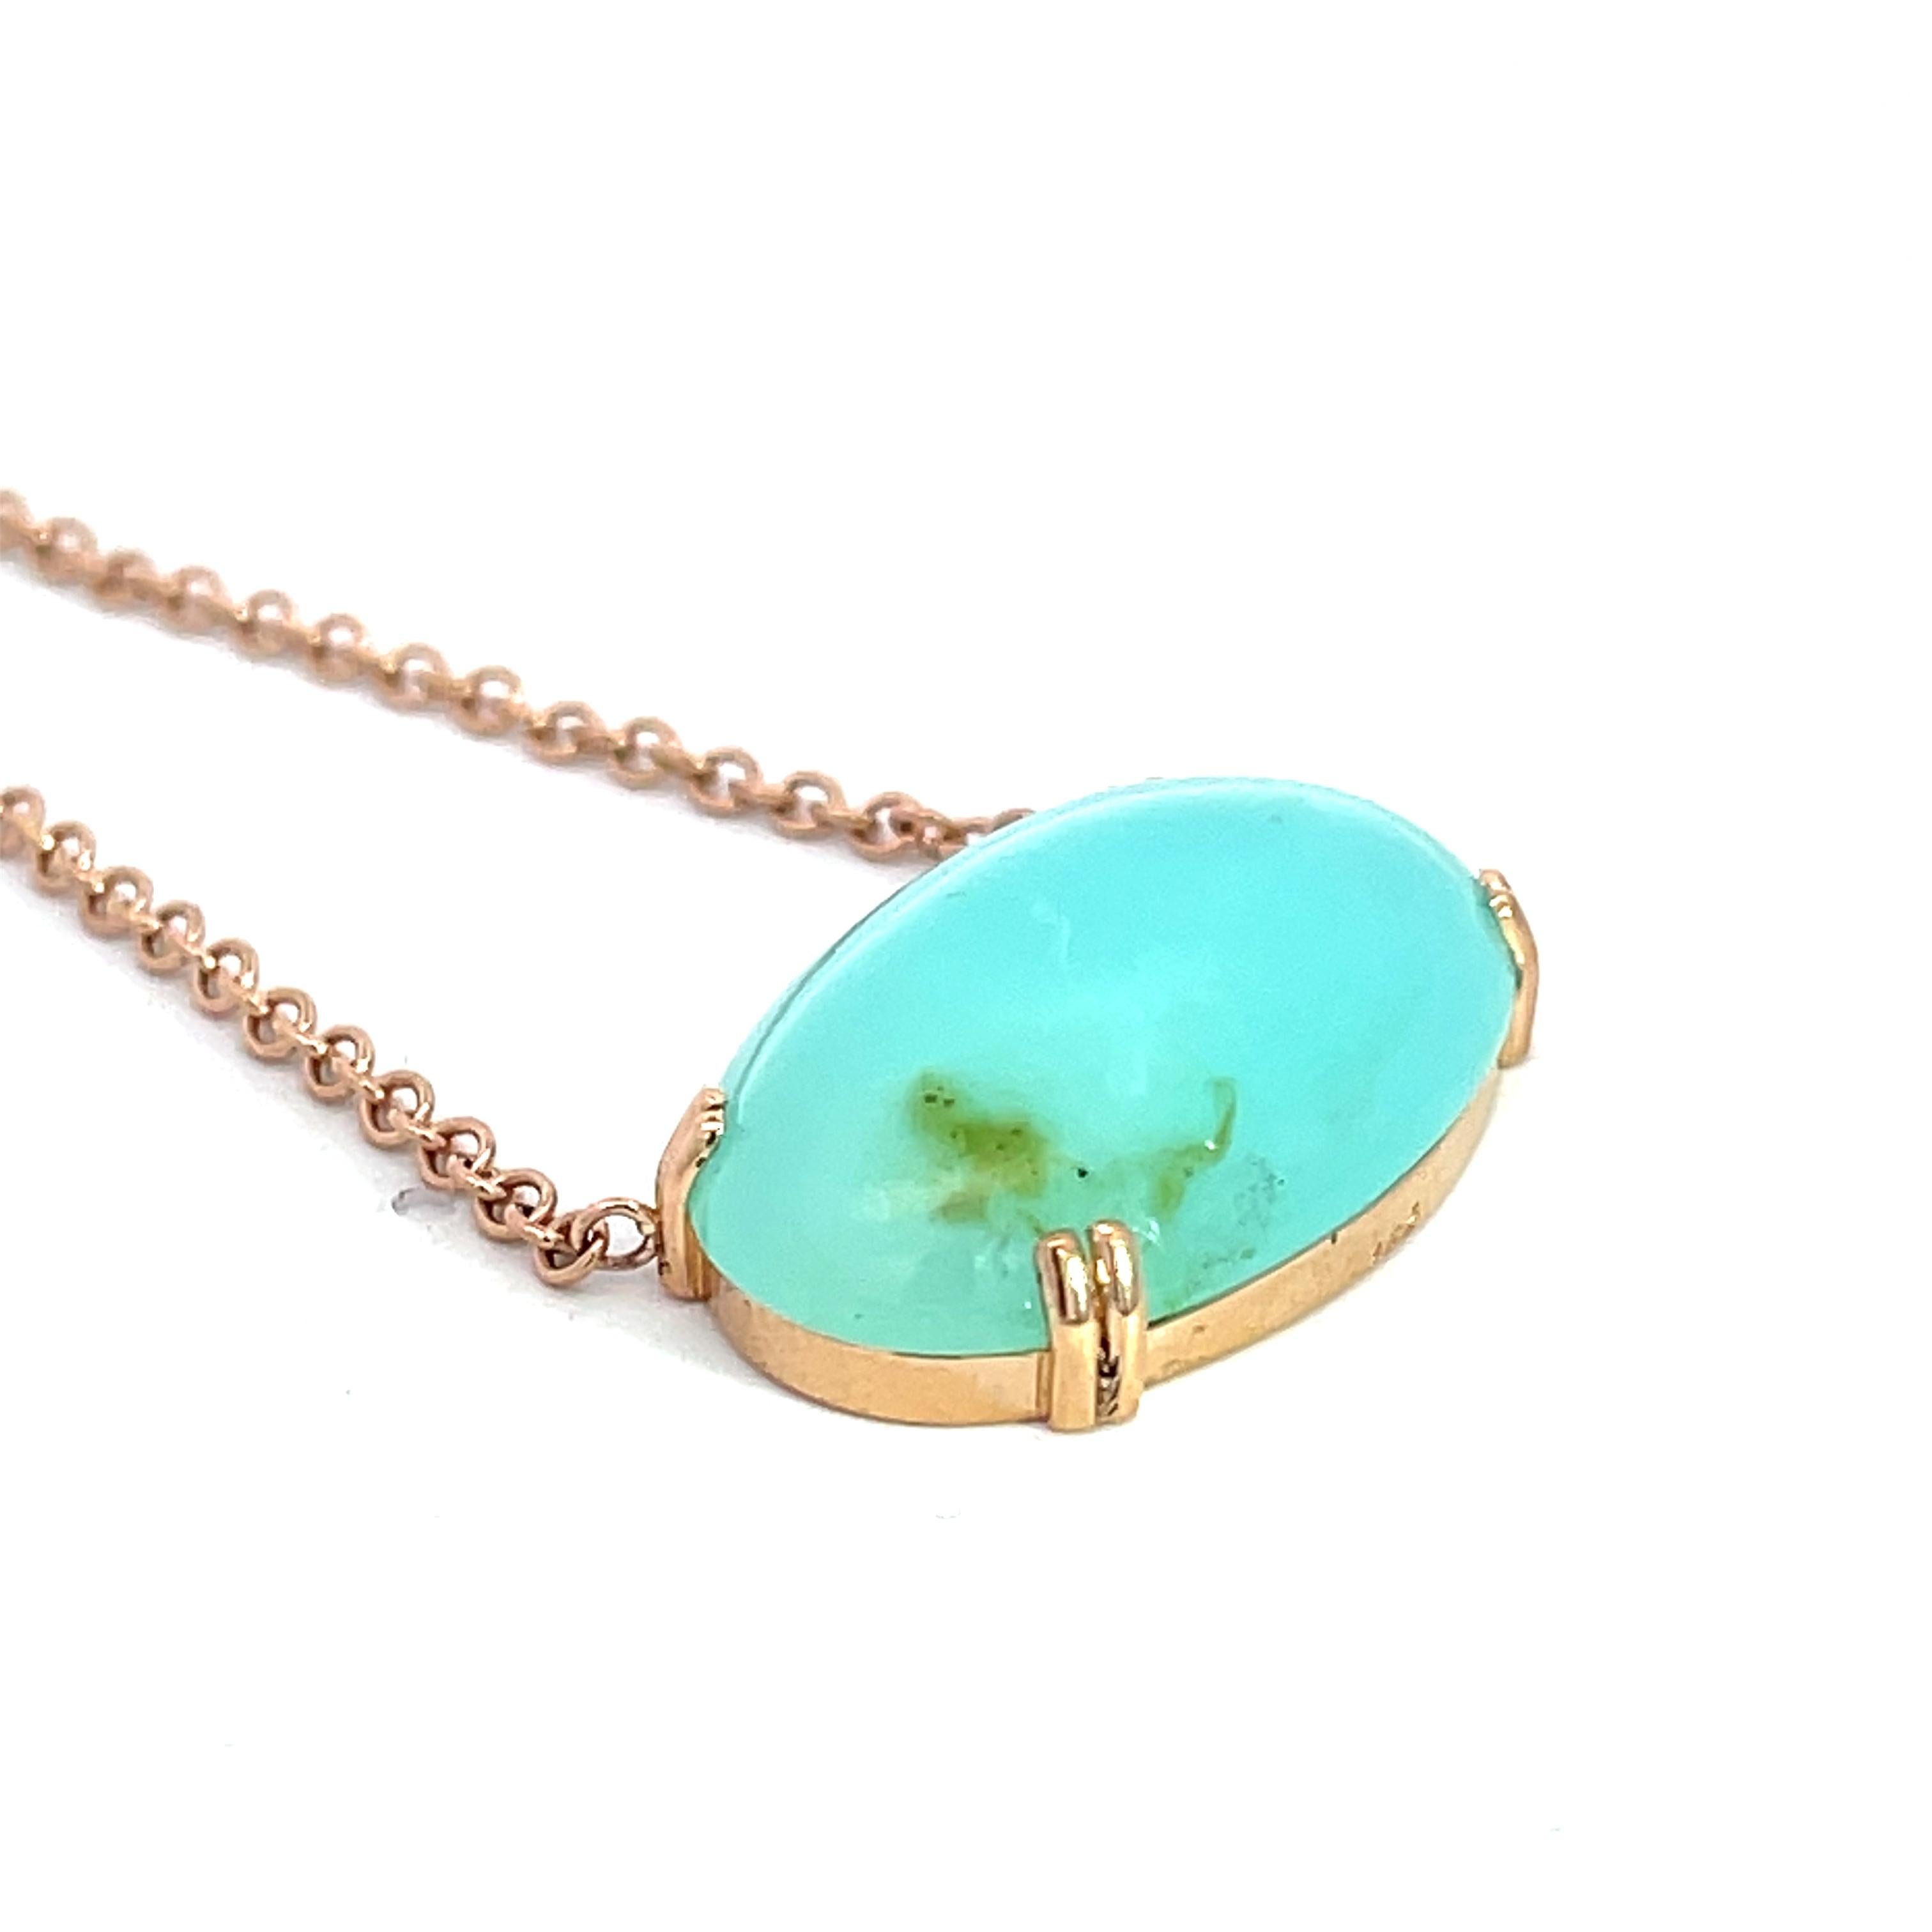 An 18k rose gold pendant featuring one oval cabochon Peruvian Opal, weighing 16.64 carats on a 2.0mm 14k rose gold cable chain. This necklace was designed and made by Sydney Strong.